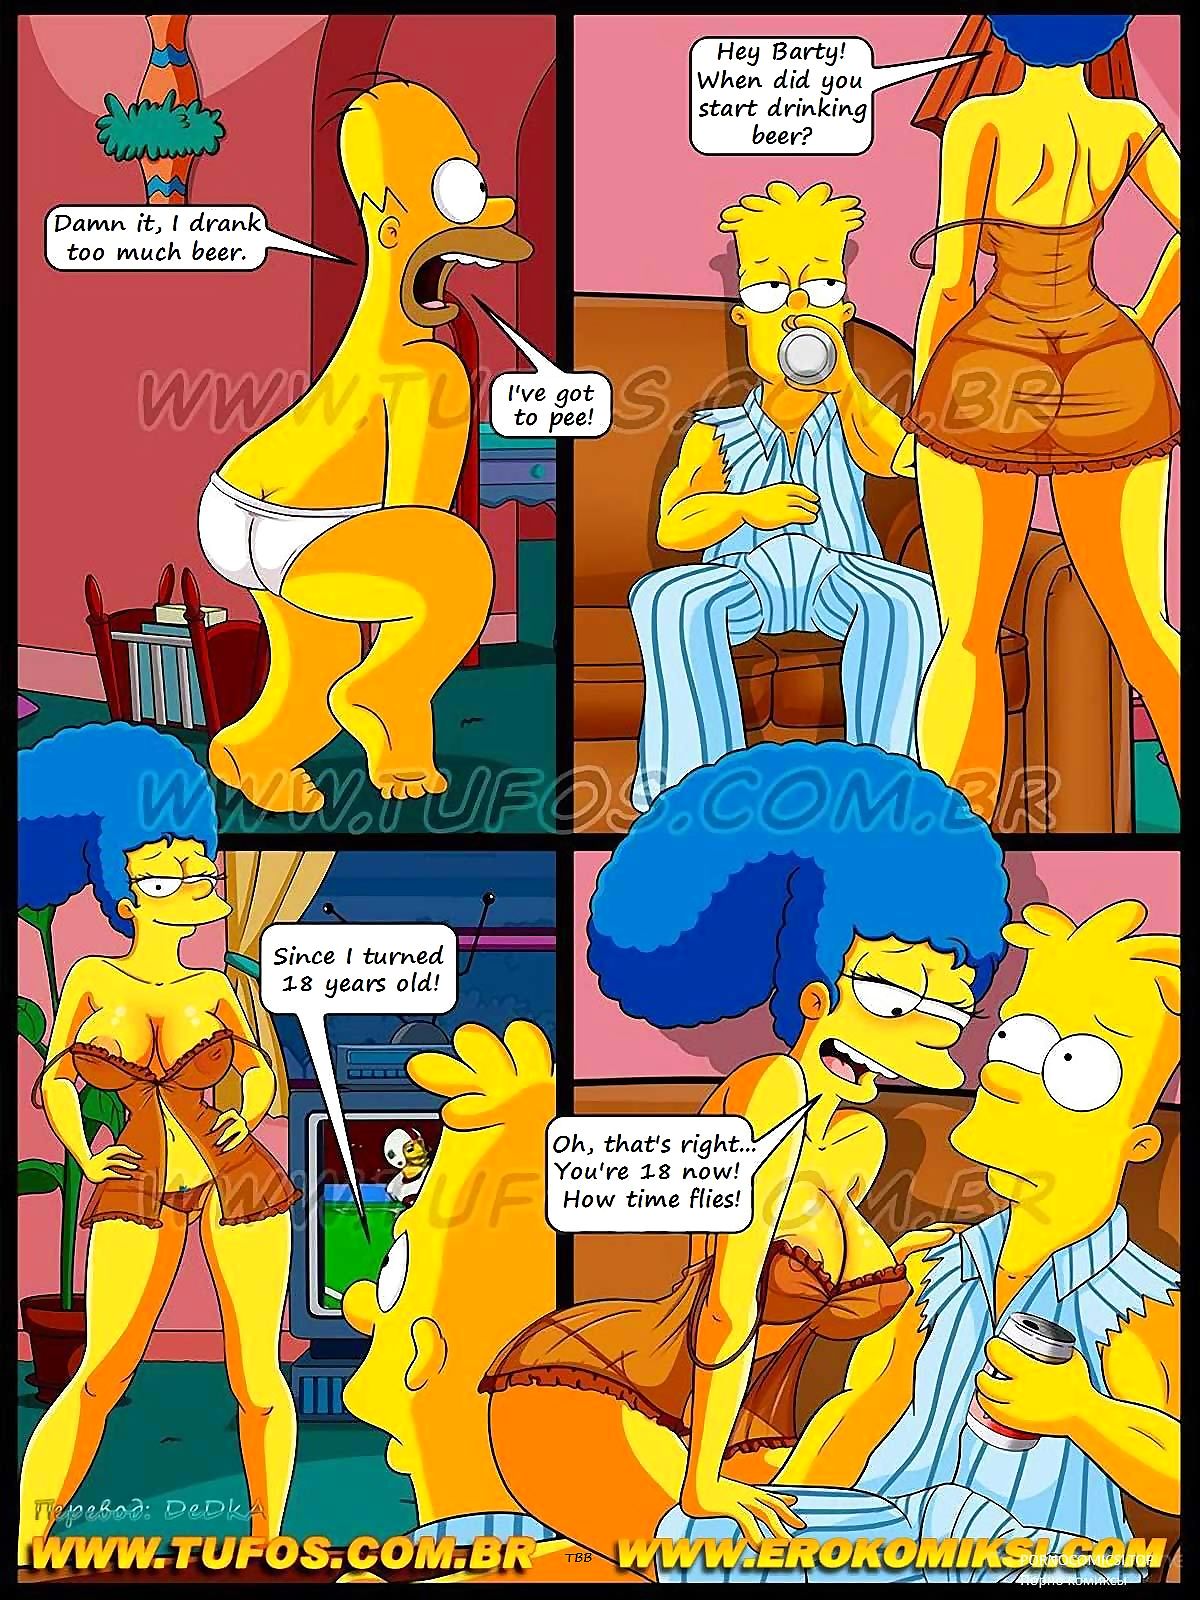 The Simpsons – Football and Beer Part 1 page 1